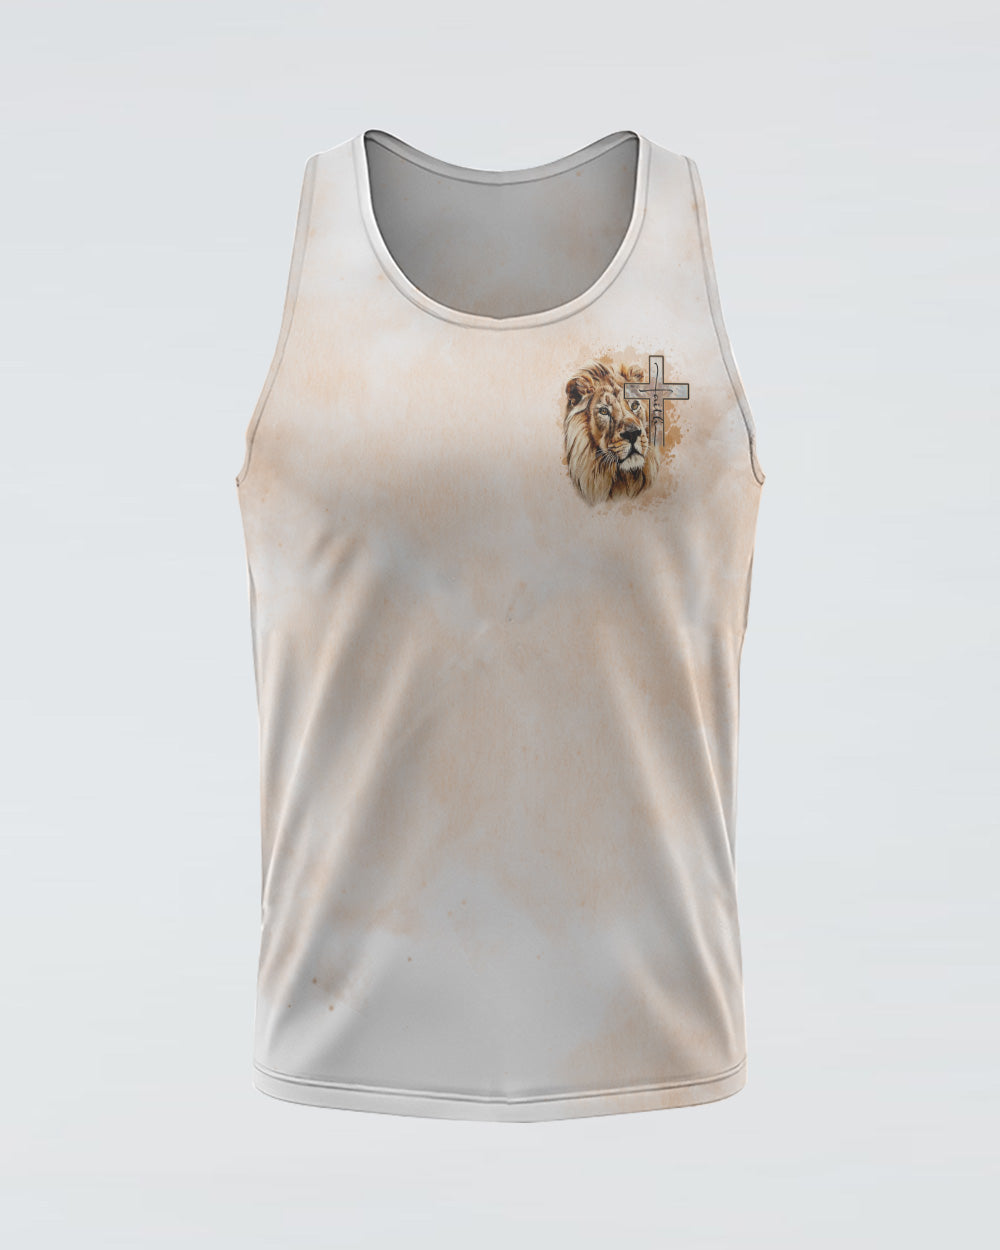 I Would Rather Stand With God Painting Lion Women's Christian Tanks